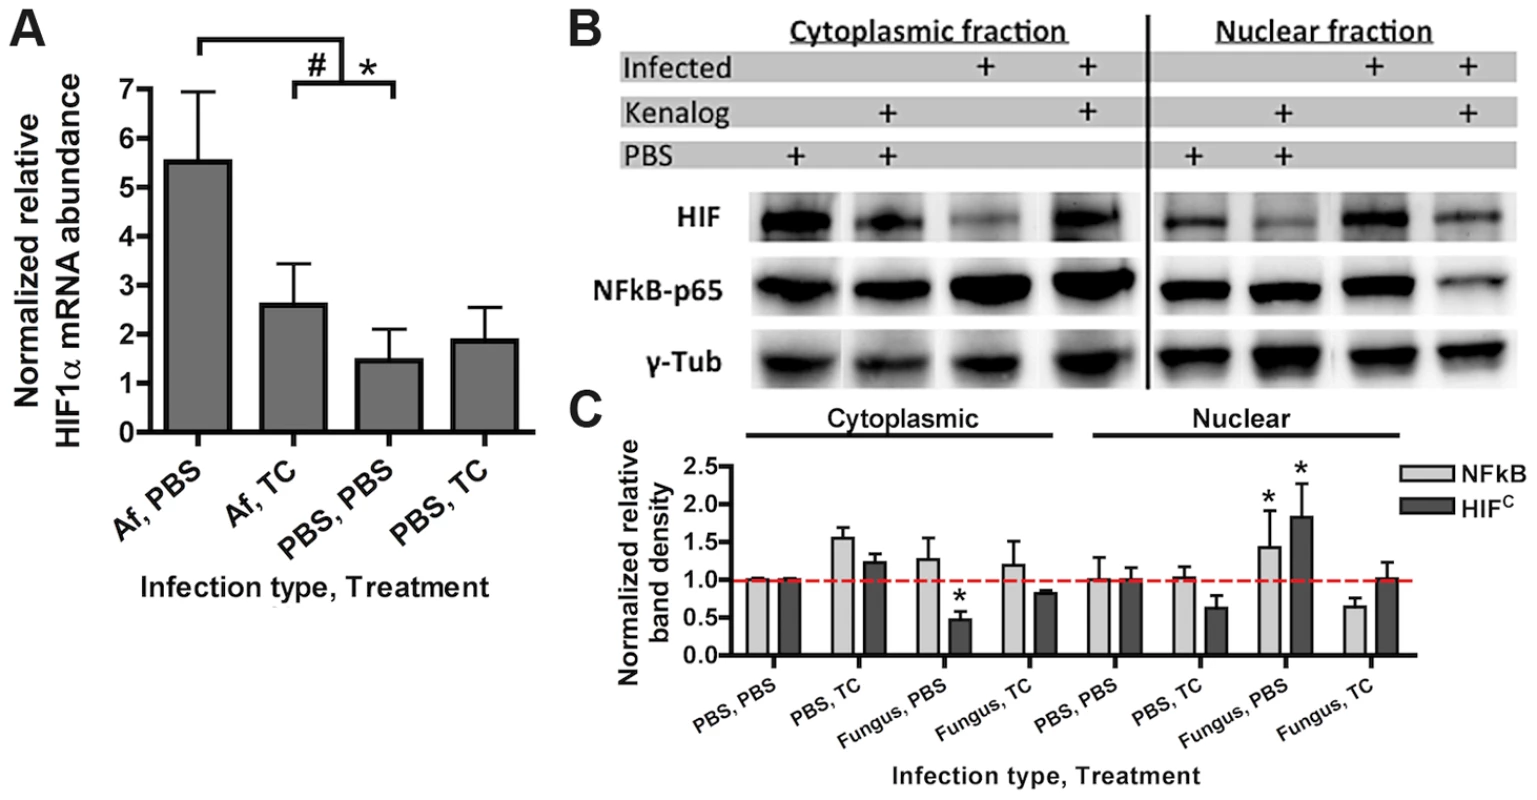 Steroid treatment reduces HIF mRNA abundance and protein nuclear localization induced by <i>A. fumigatus</i> infection.